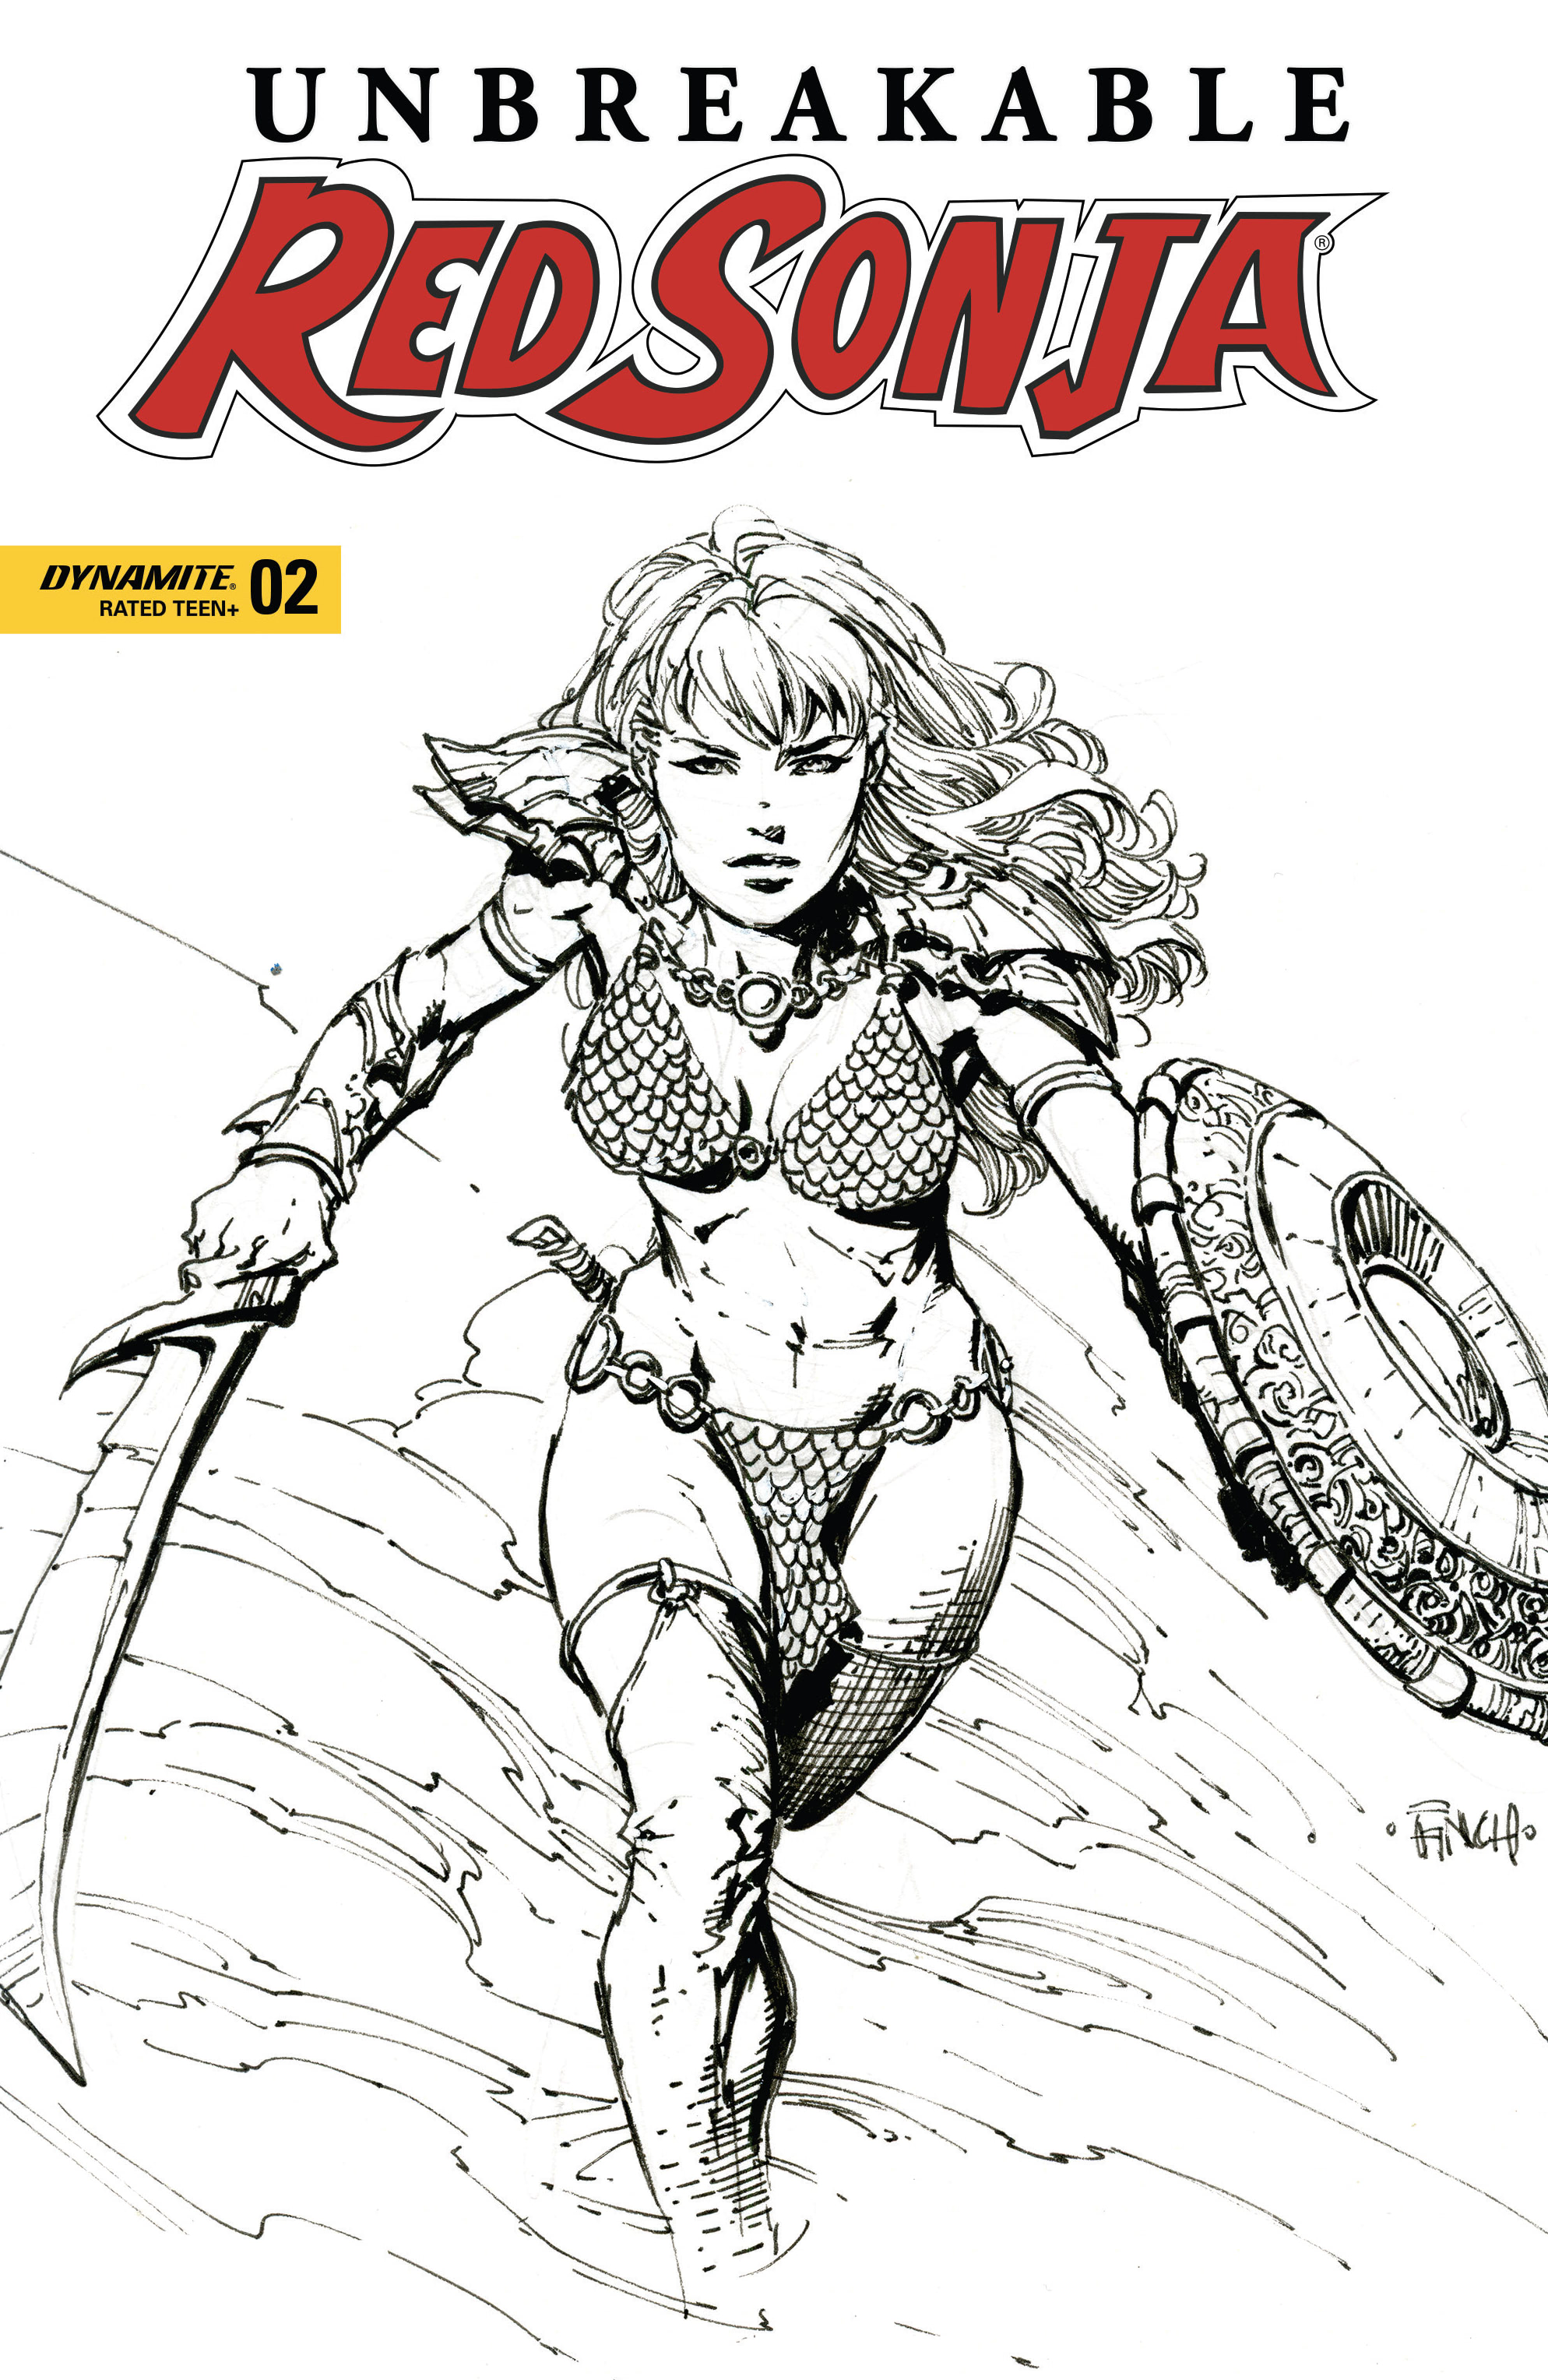 Read online Unbreakable Red Sonja comic -  Issue #2 - 4